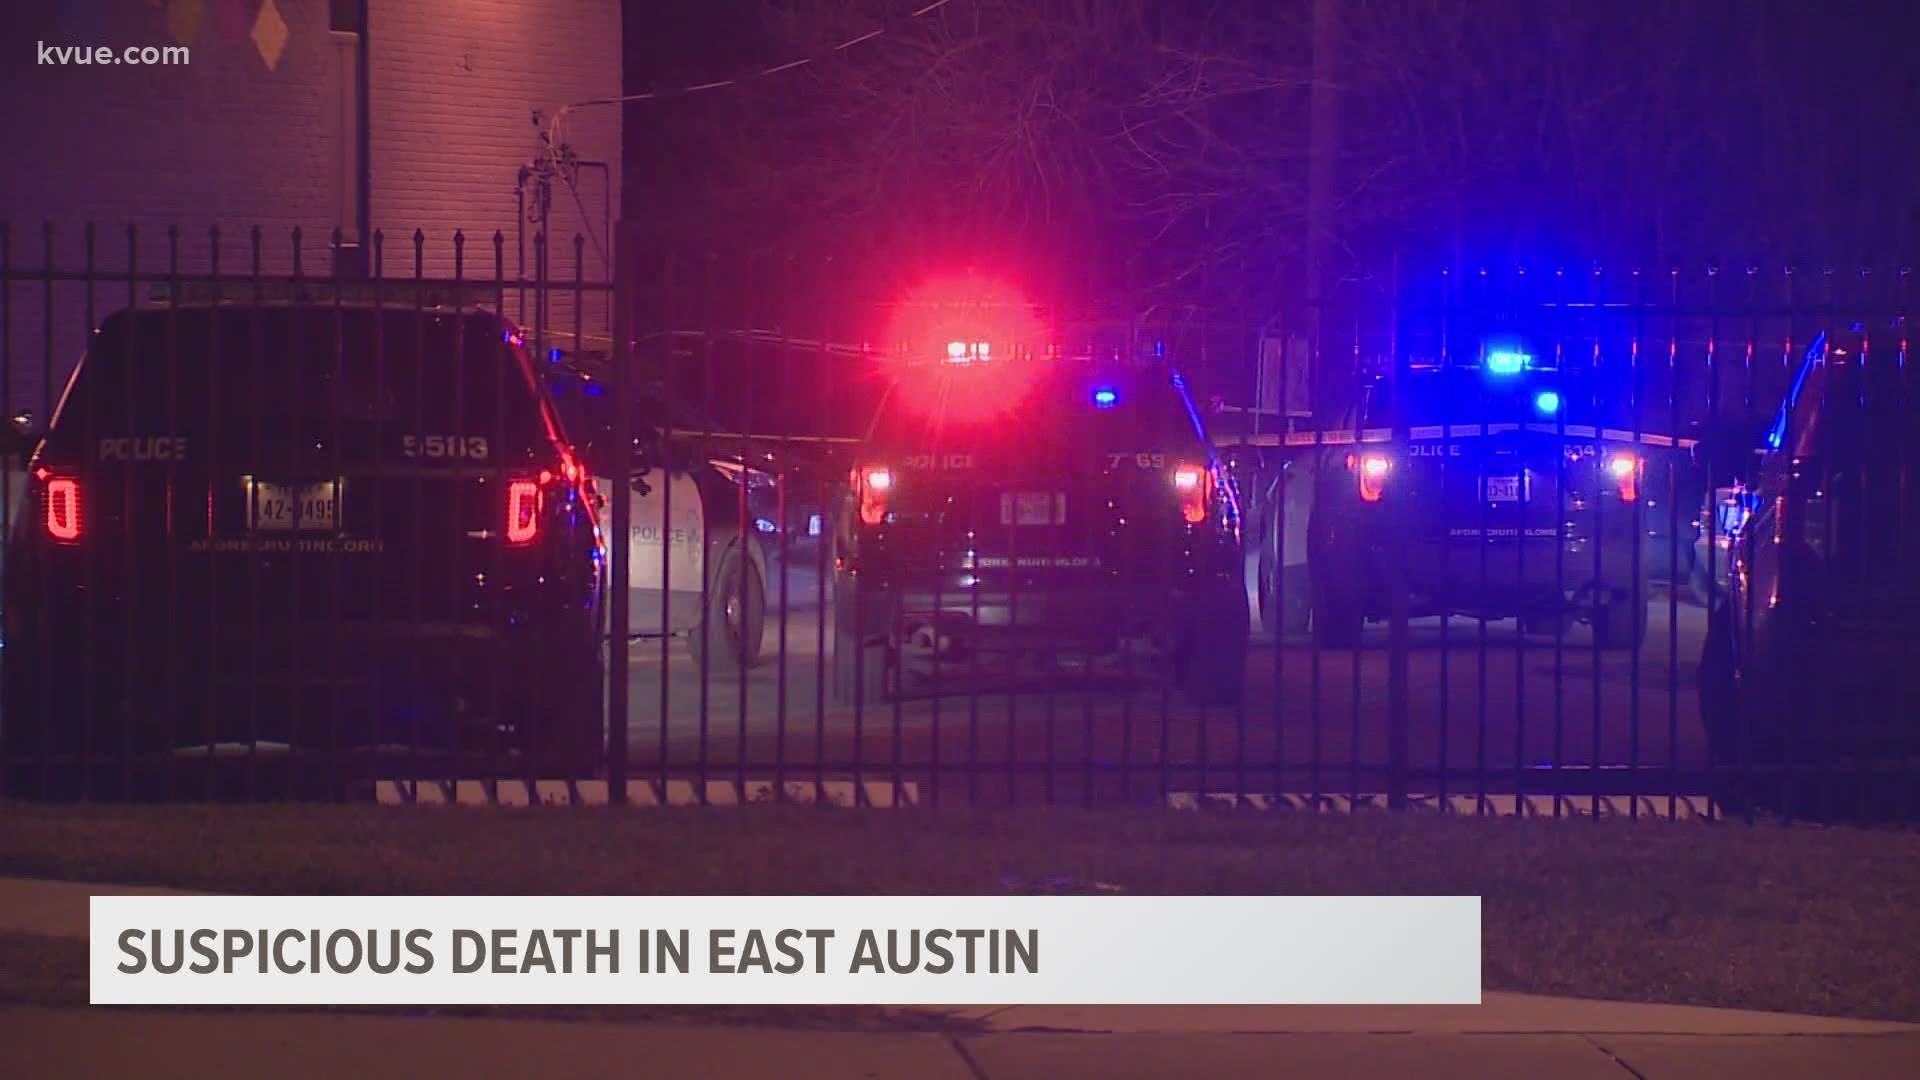 The Austin Police Department tweeted about the incident just after 10 p.m. Tuesday.